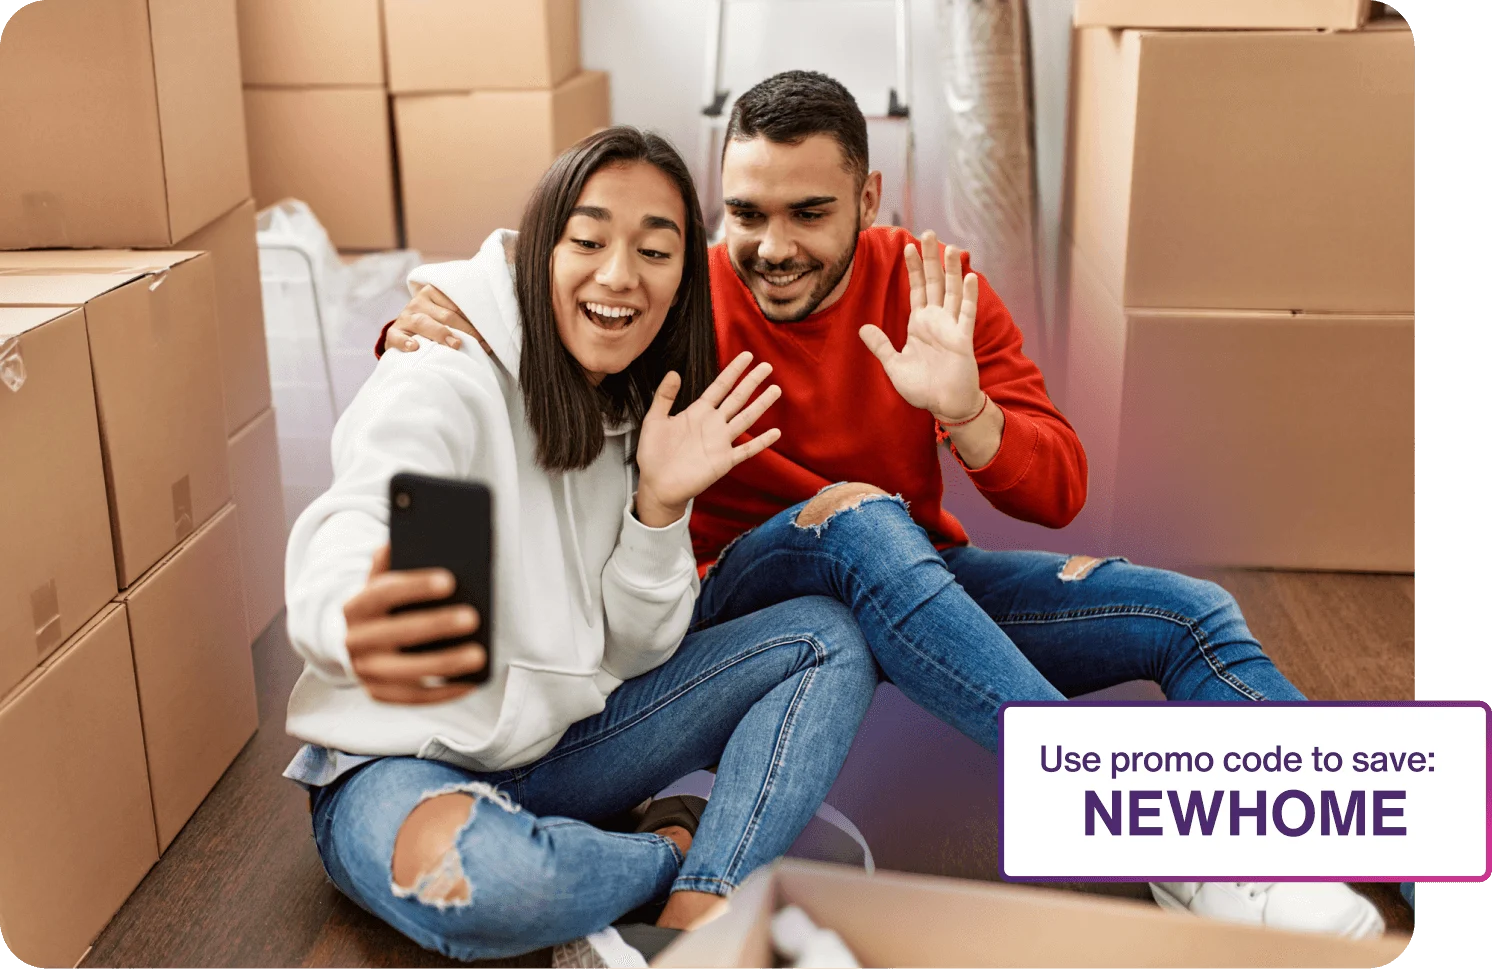 A man and woman surrounded by moving boxes and waving at a smartphone camera. A text box overlay reads “Use promo code to save: NEWHOME”.